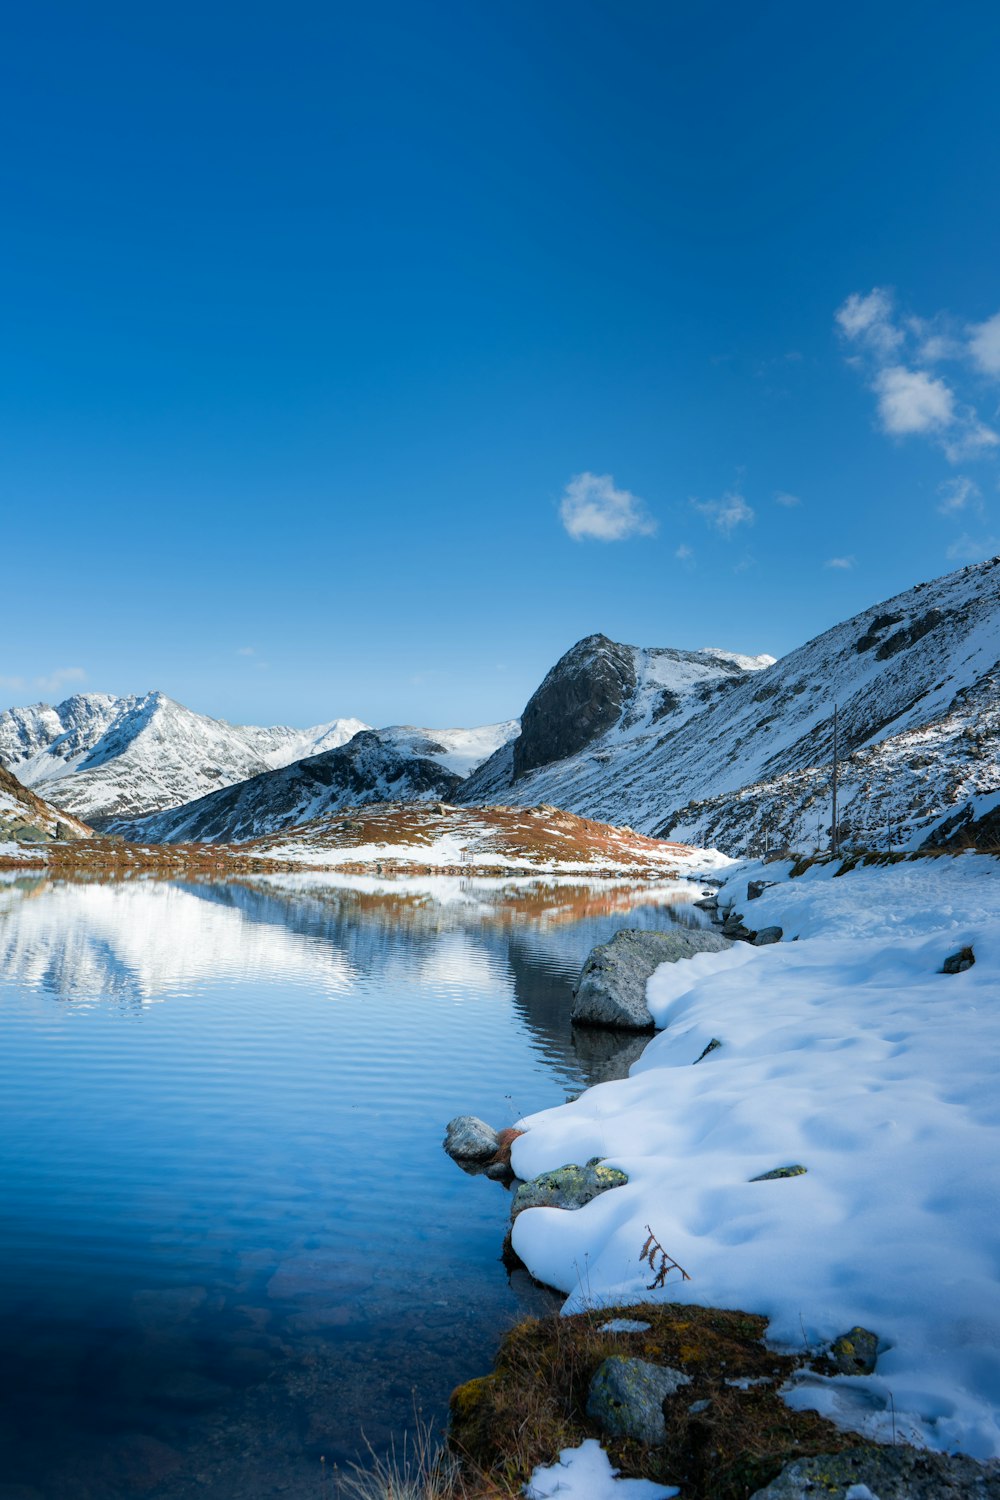 a lake surrounded by snow covered mountains under a blue sky